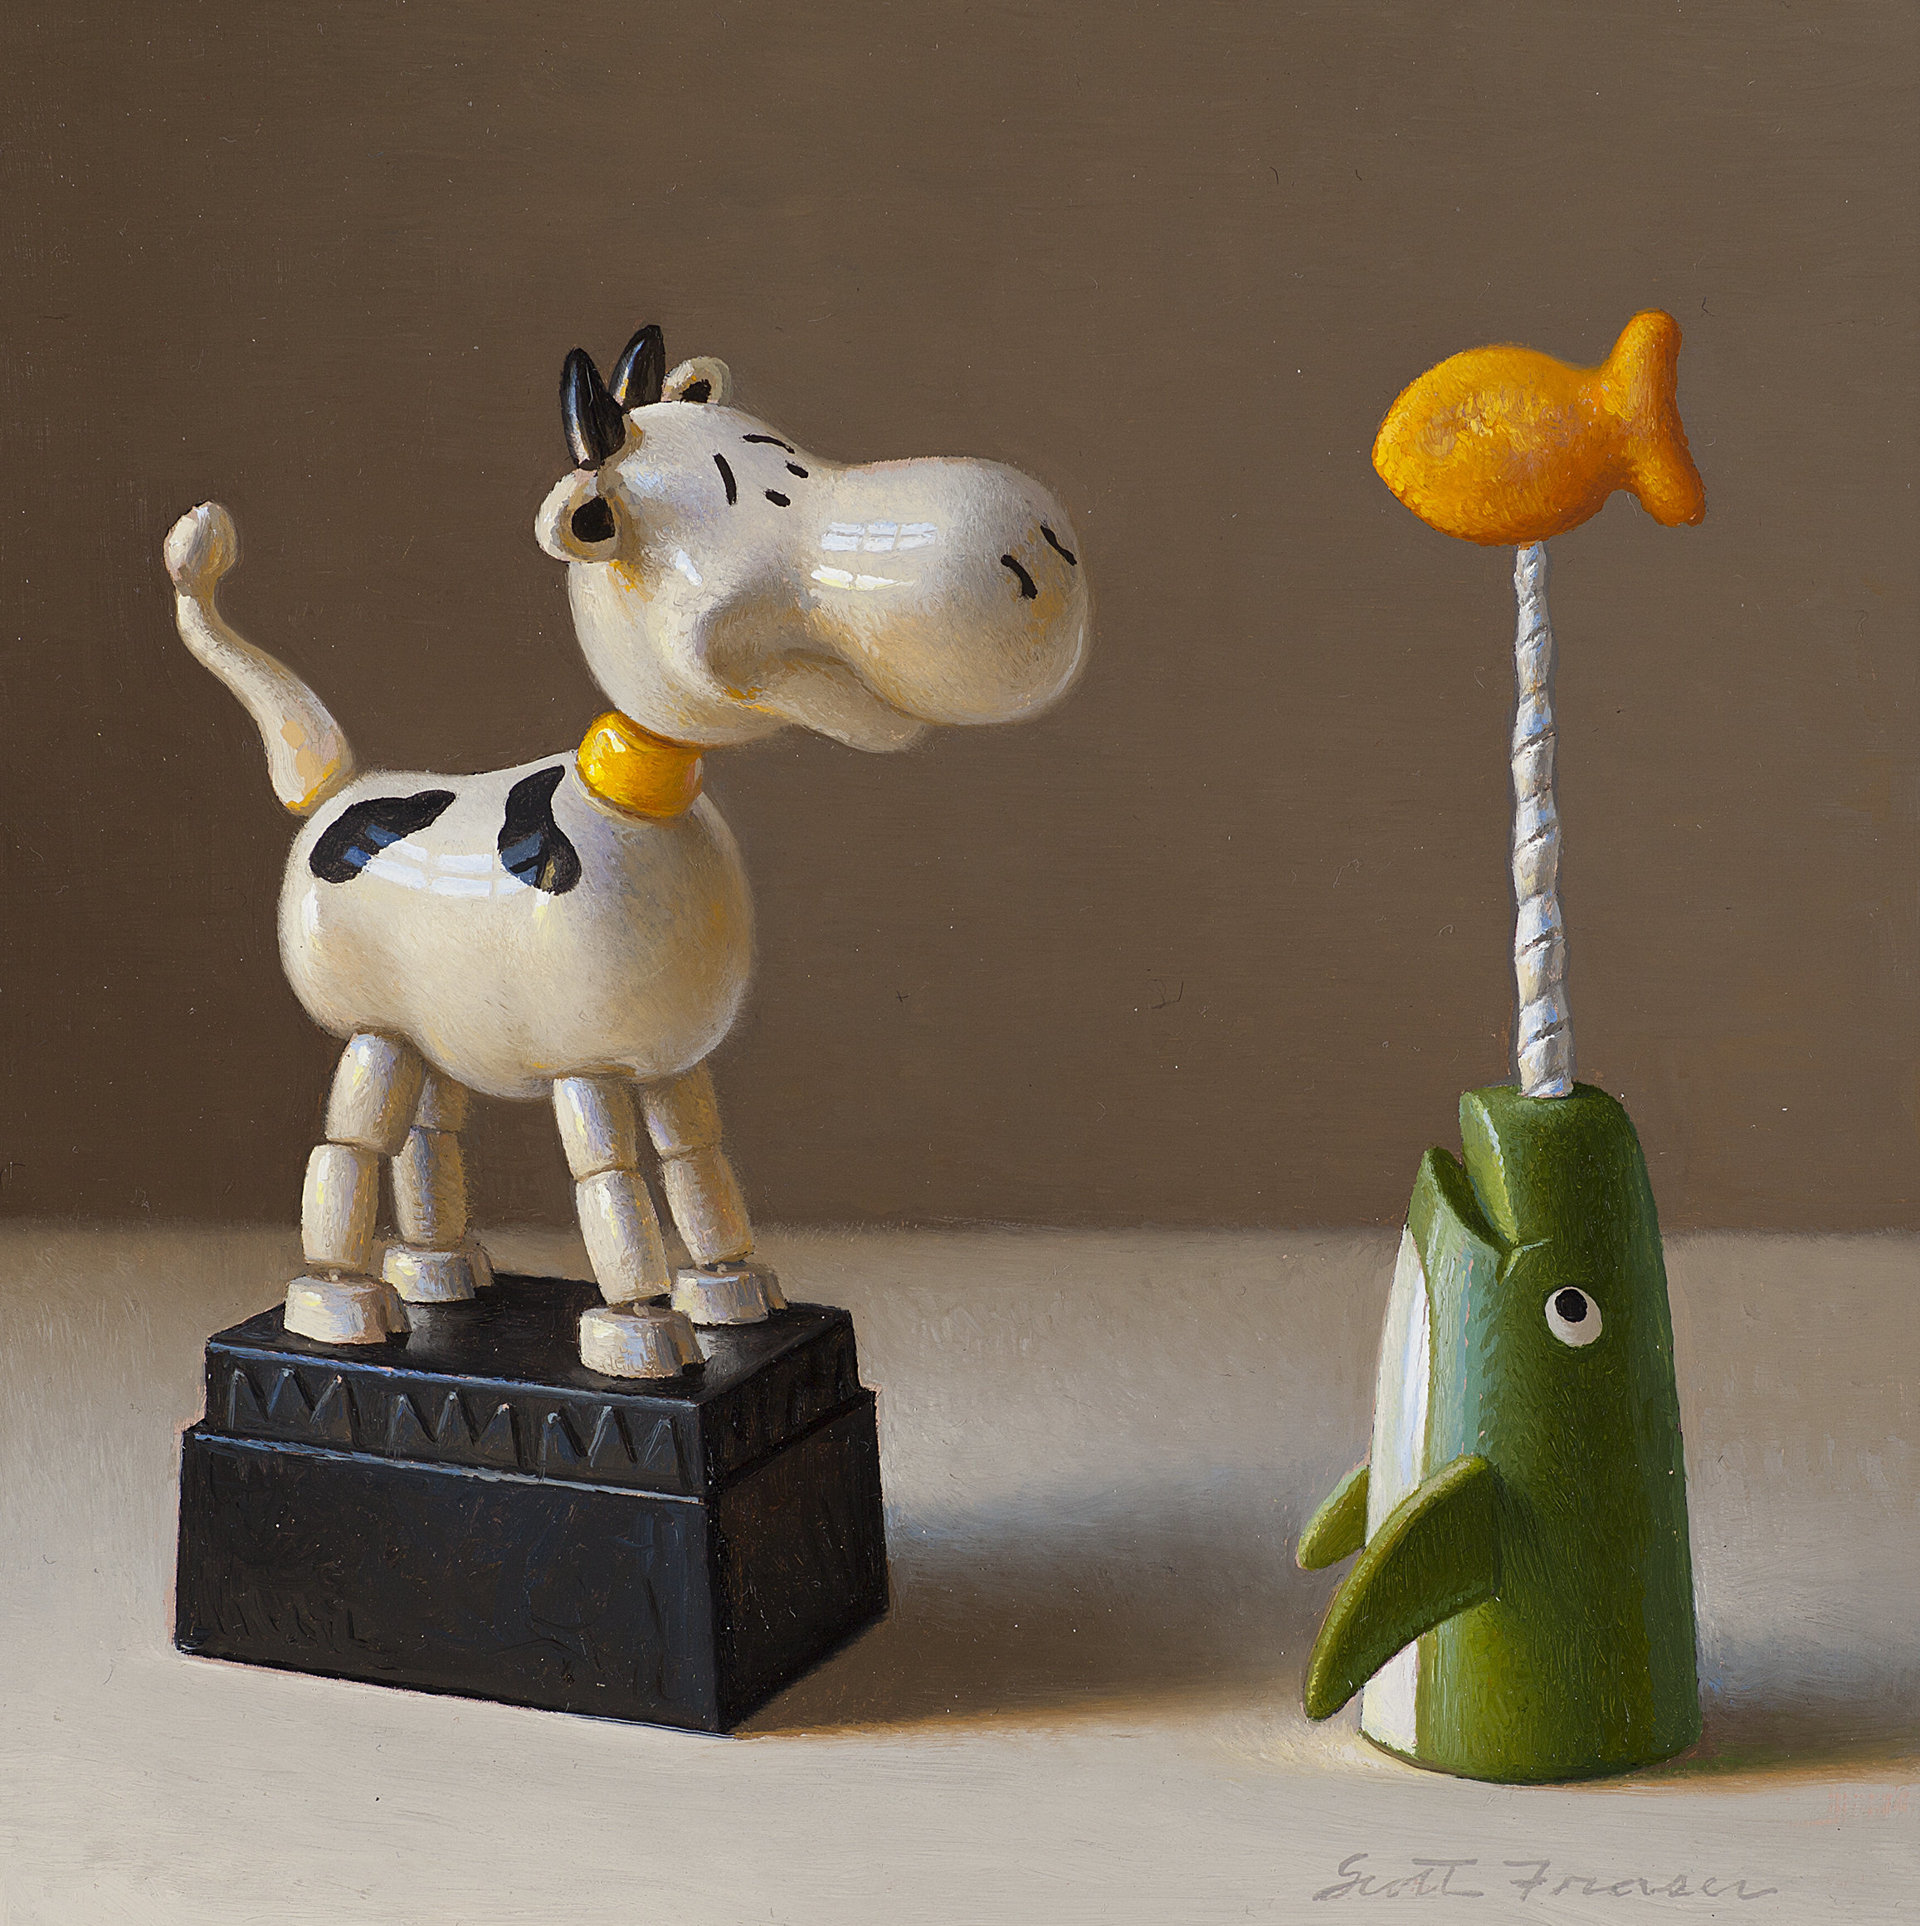 Cow and the Narwhal by Scott Fraser